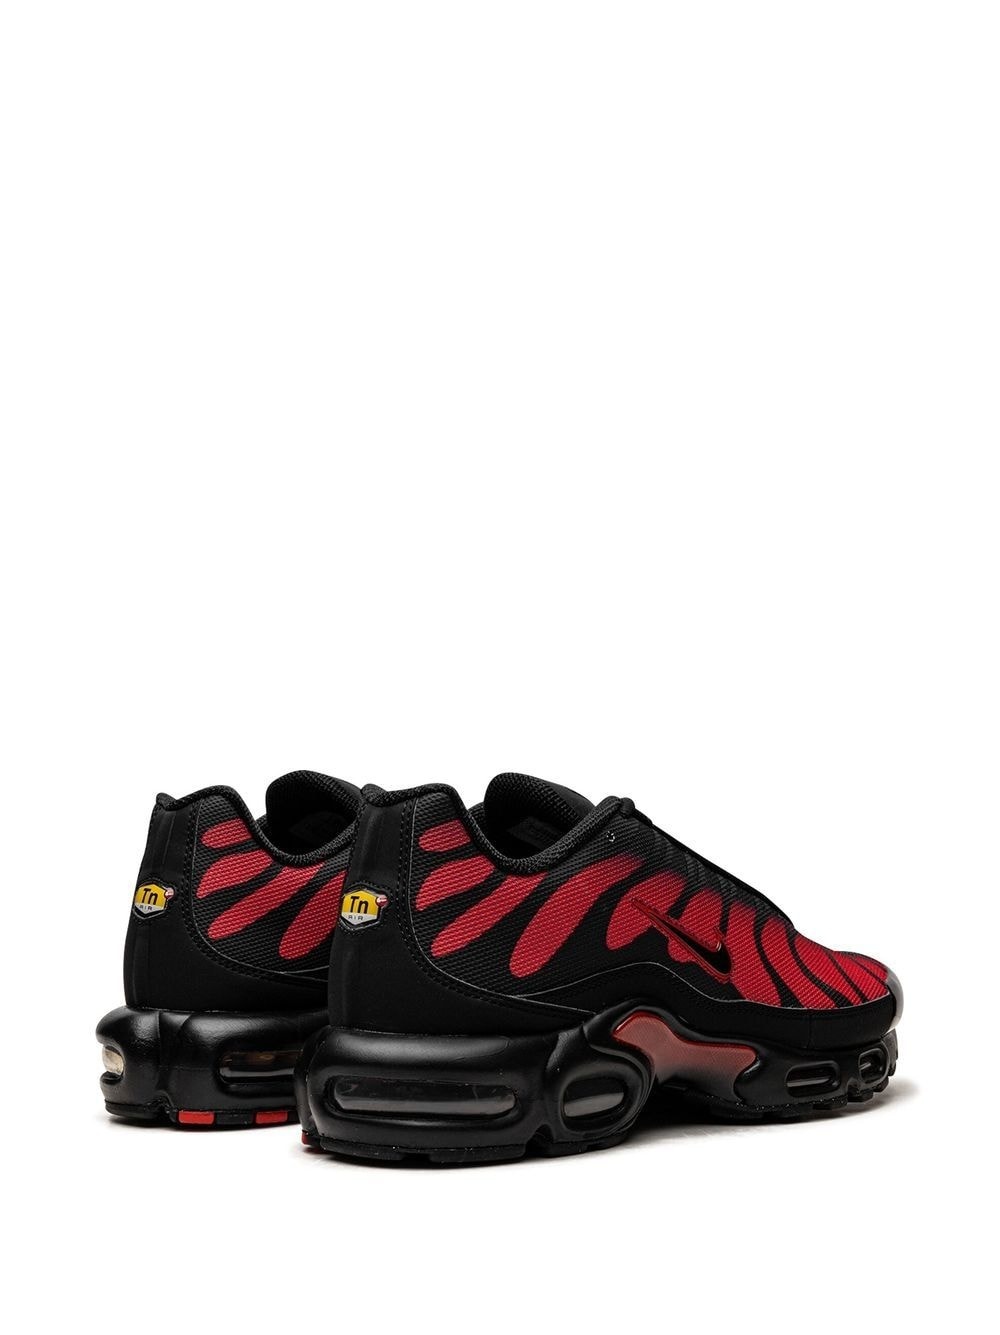 Air Max Plus "Bred Reflective" sneakers - 3